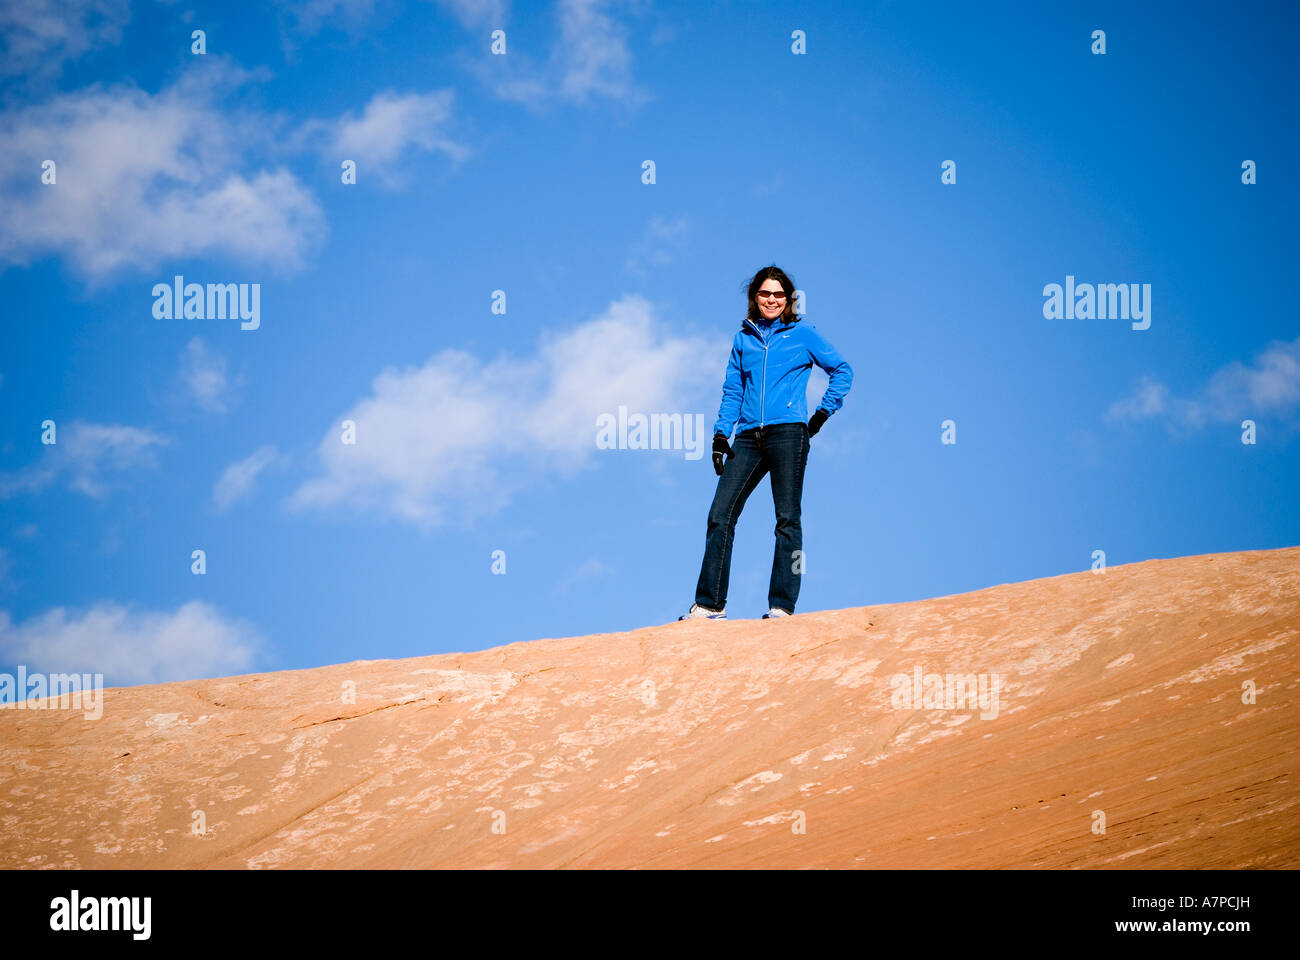 Smiling woman hiker standing on Entrada sandstone ridge with blue sky and white clouds Arches National Park Utah USA Stock Photo